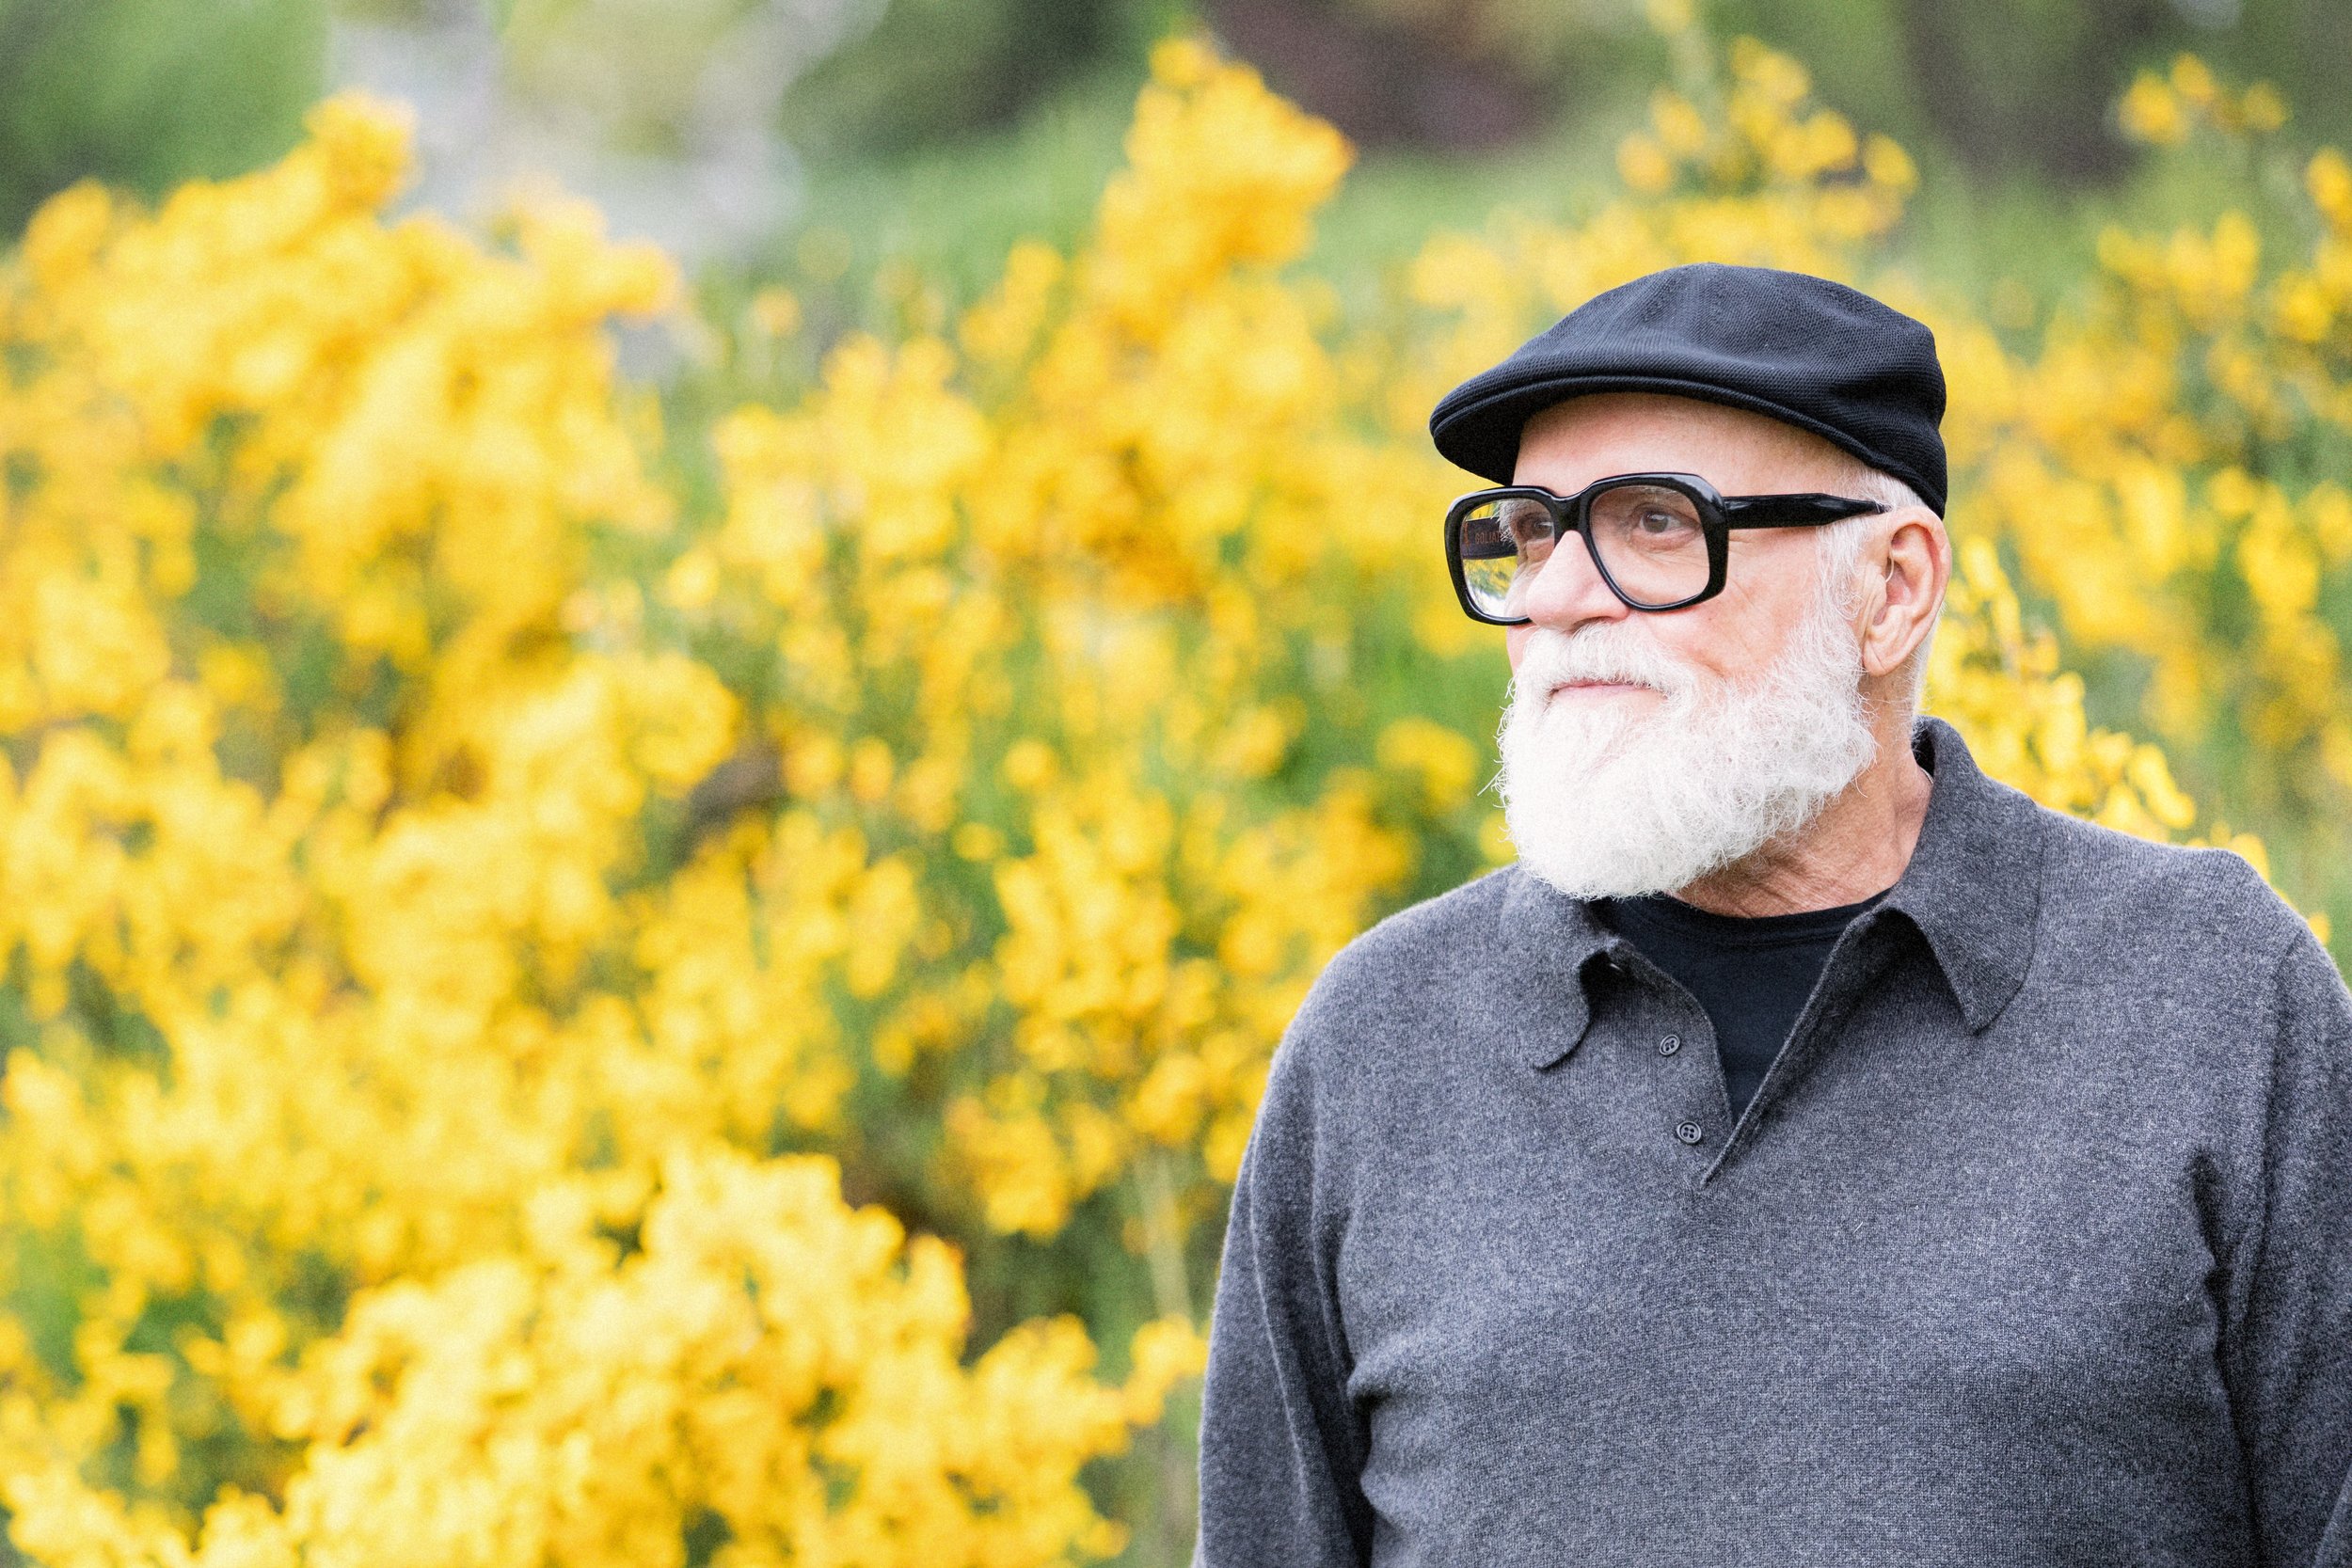 Older man white beard bold glasses posing outdoors on location wearing a hat and sweater.